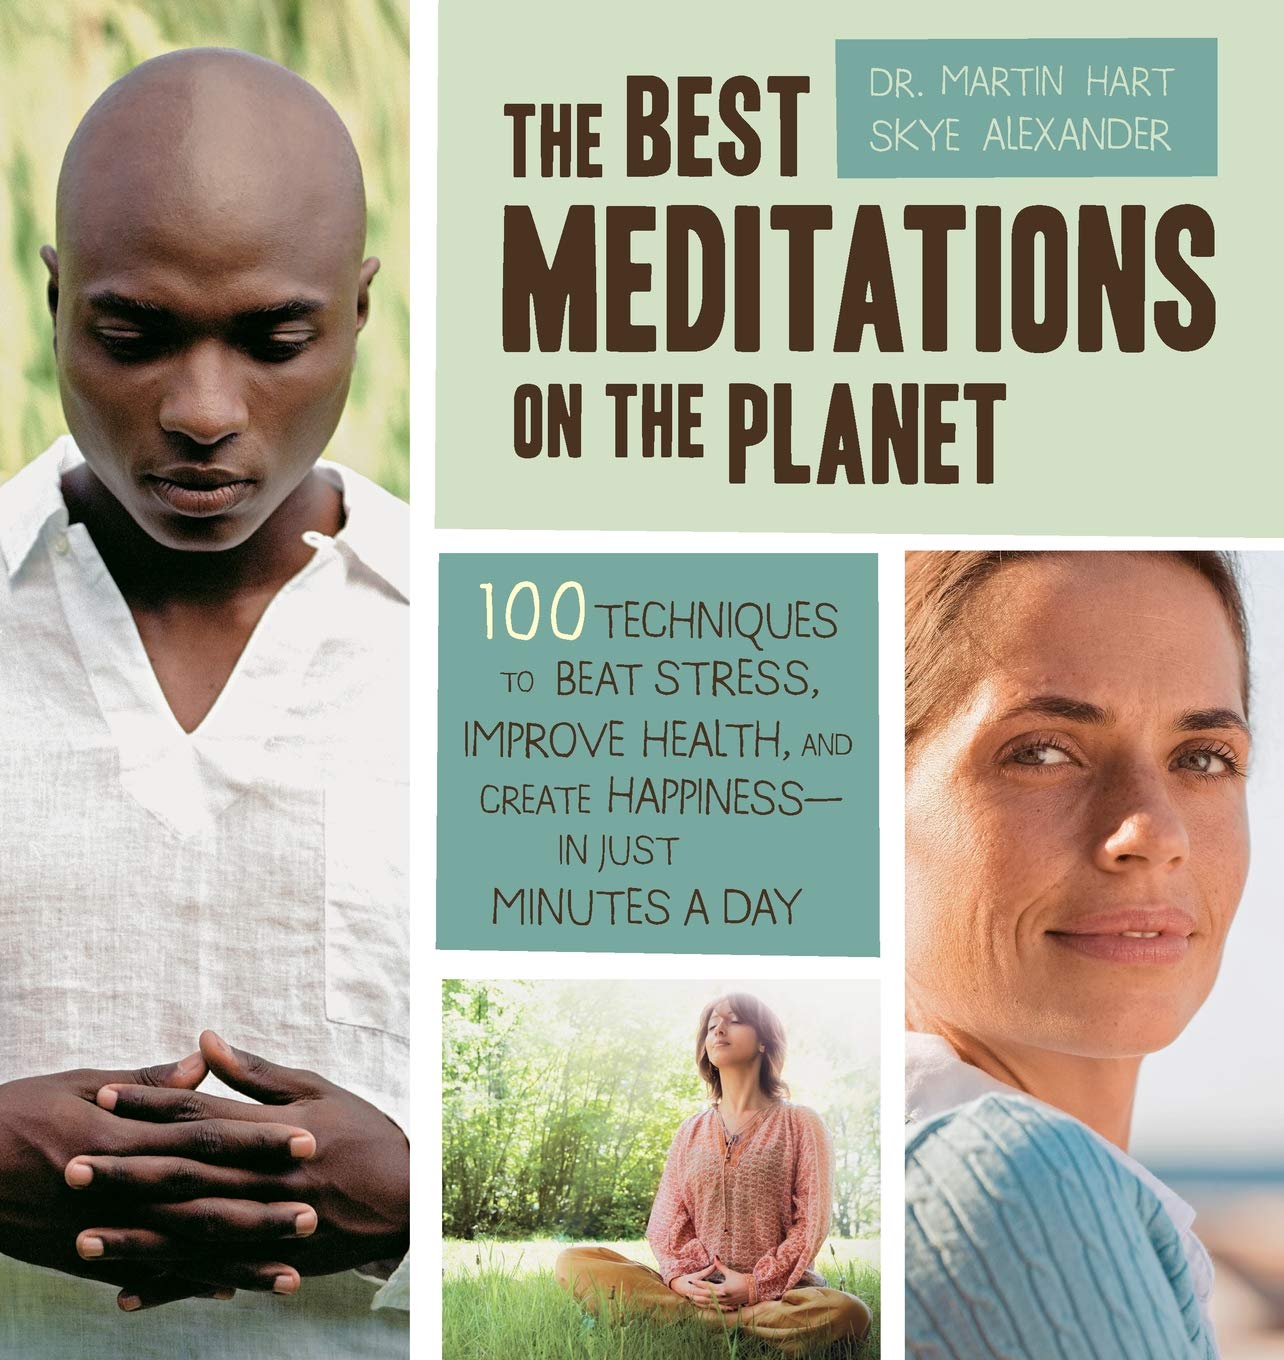 The Best Meditations on the Planet